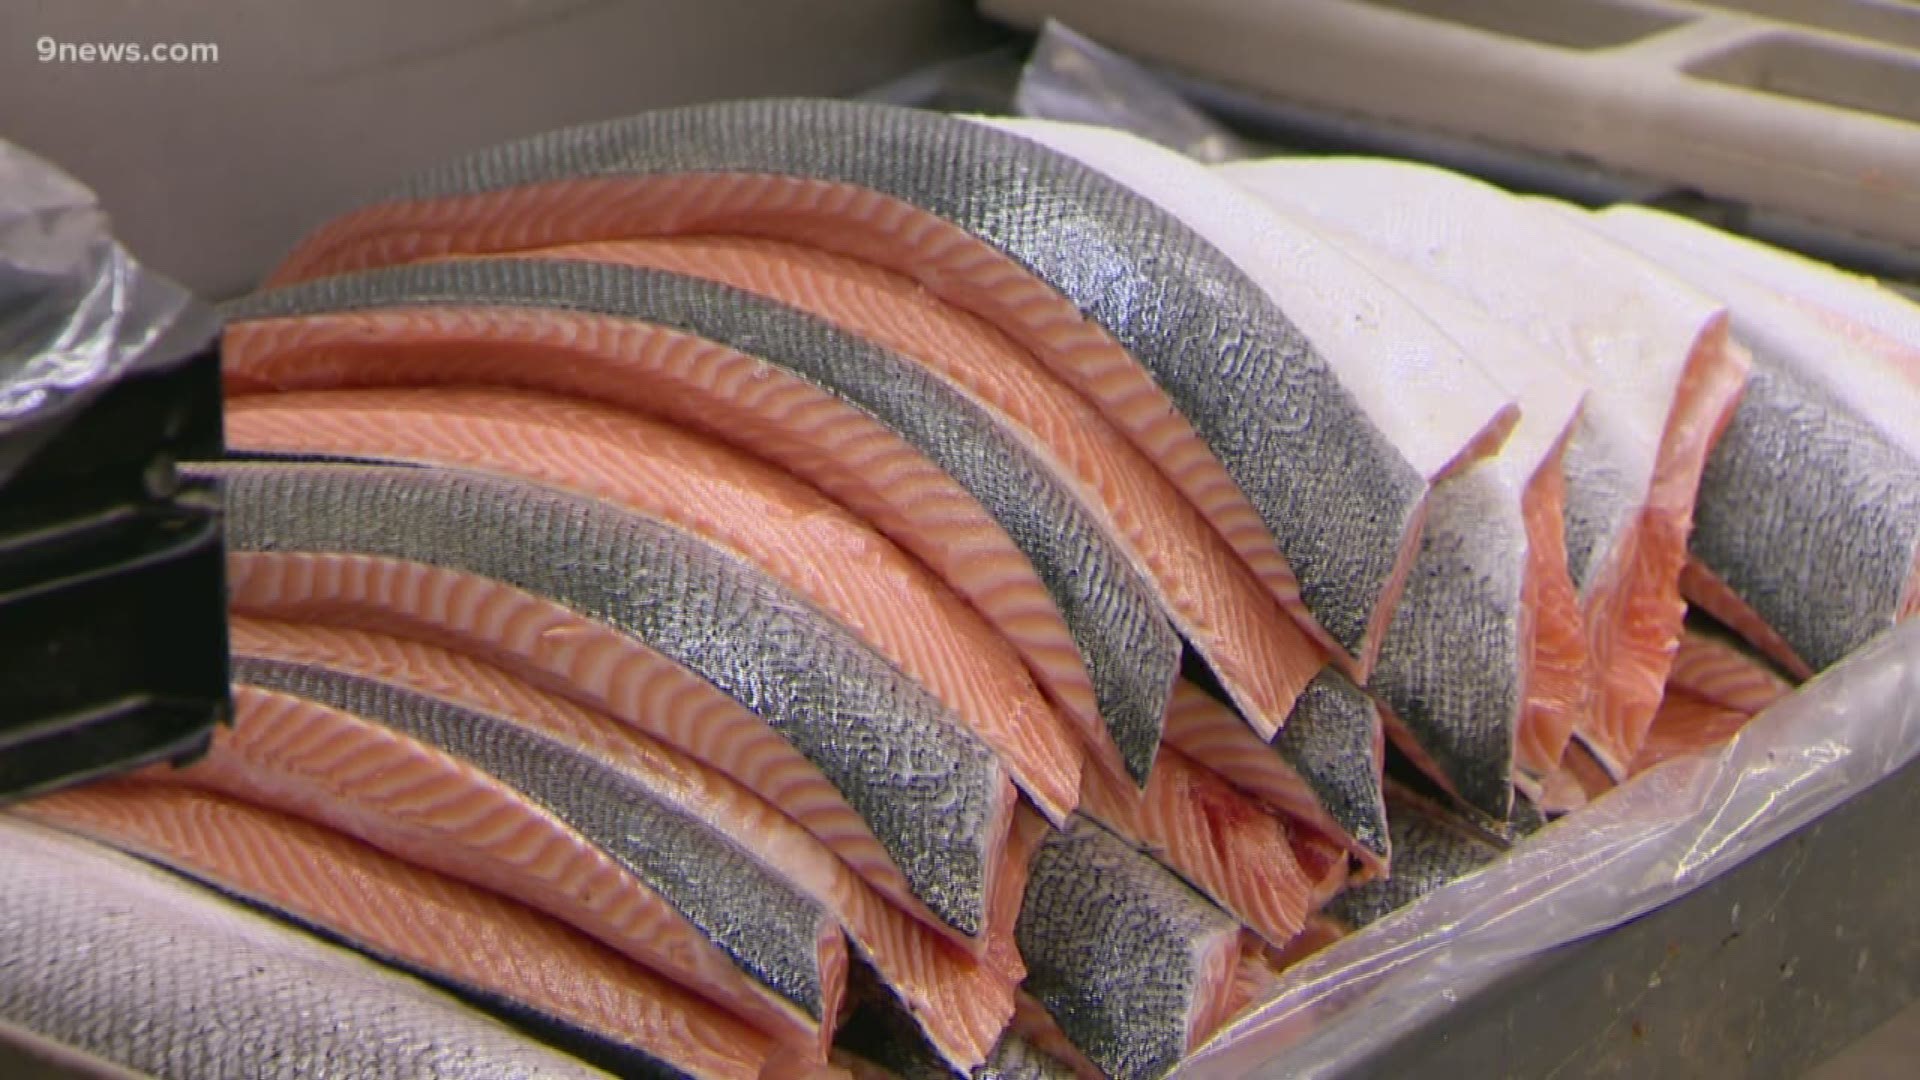 When it comes to food, Colorado has you covered. We have a little of everything. But how much do you know about our seafood scene? It's actually much bigger and fresher than you might think. Jon Glasgow shows us behind the scenes of Denver's Seattle Fish Co. - in the first edition of 9NEWS' The Feed.